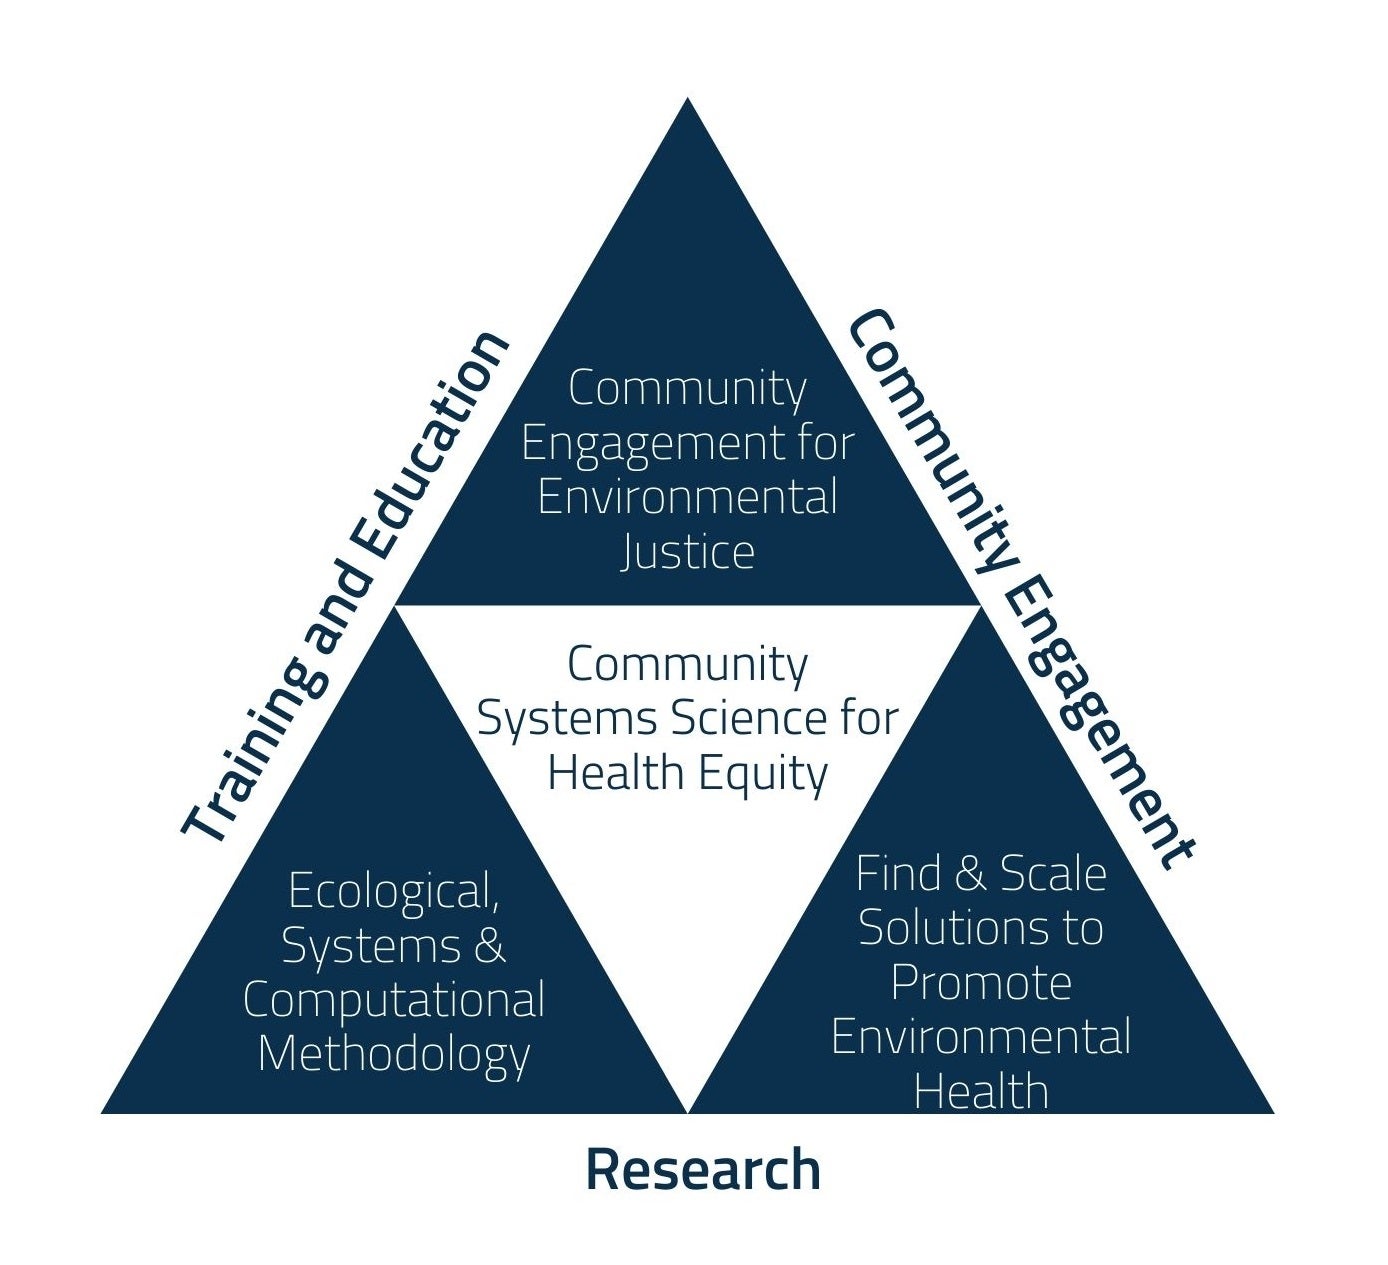 Triangle describing Swetland Approach to Research, Training, and Community Engagement